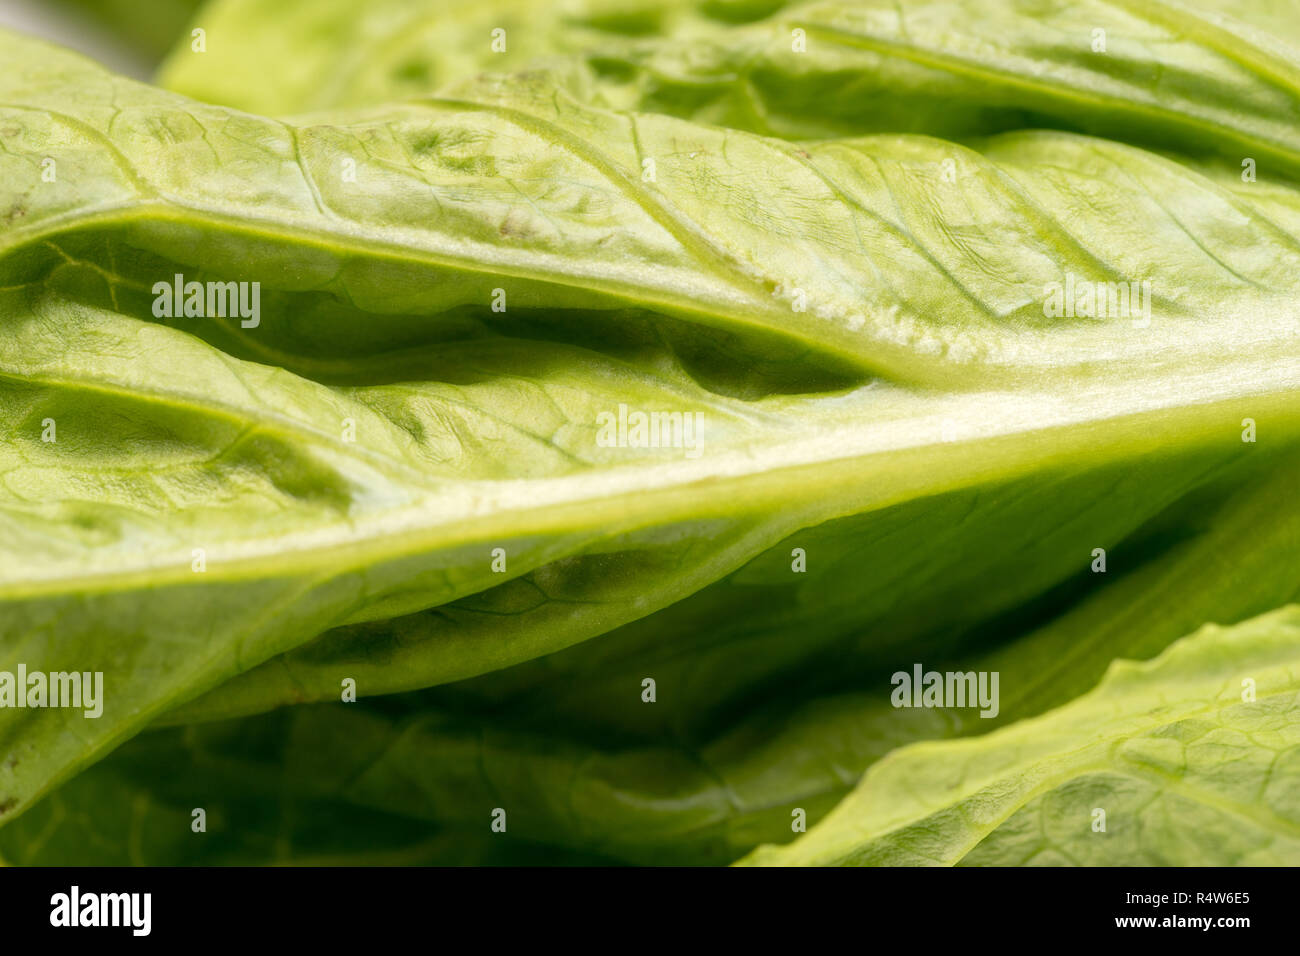 Close up of organic green leaf lettuce Stock Photo